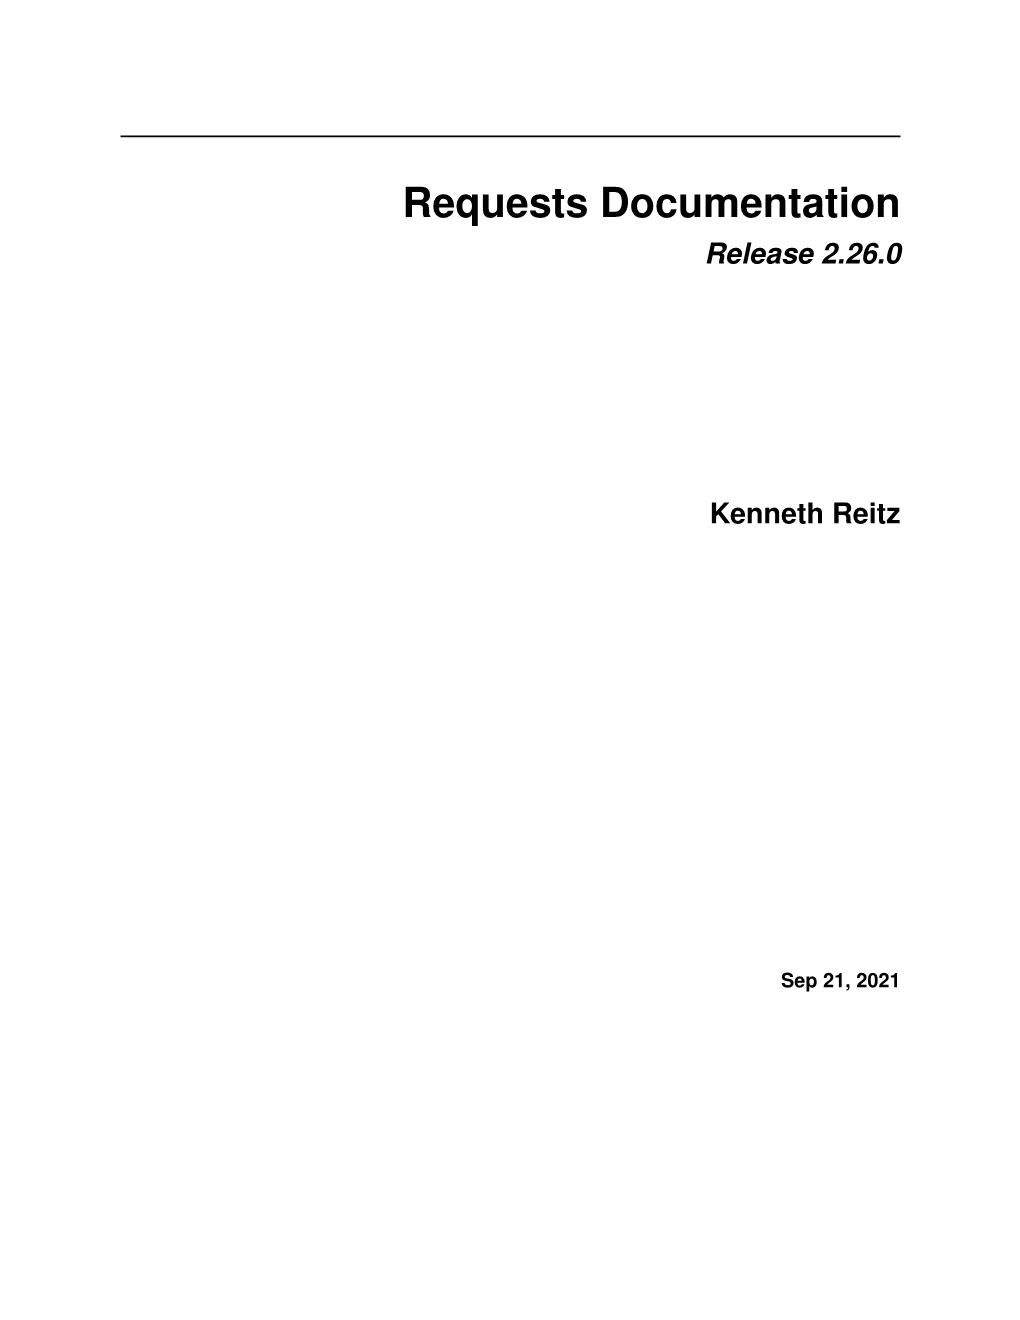 Requests Documentation Release 2.26.0